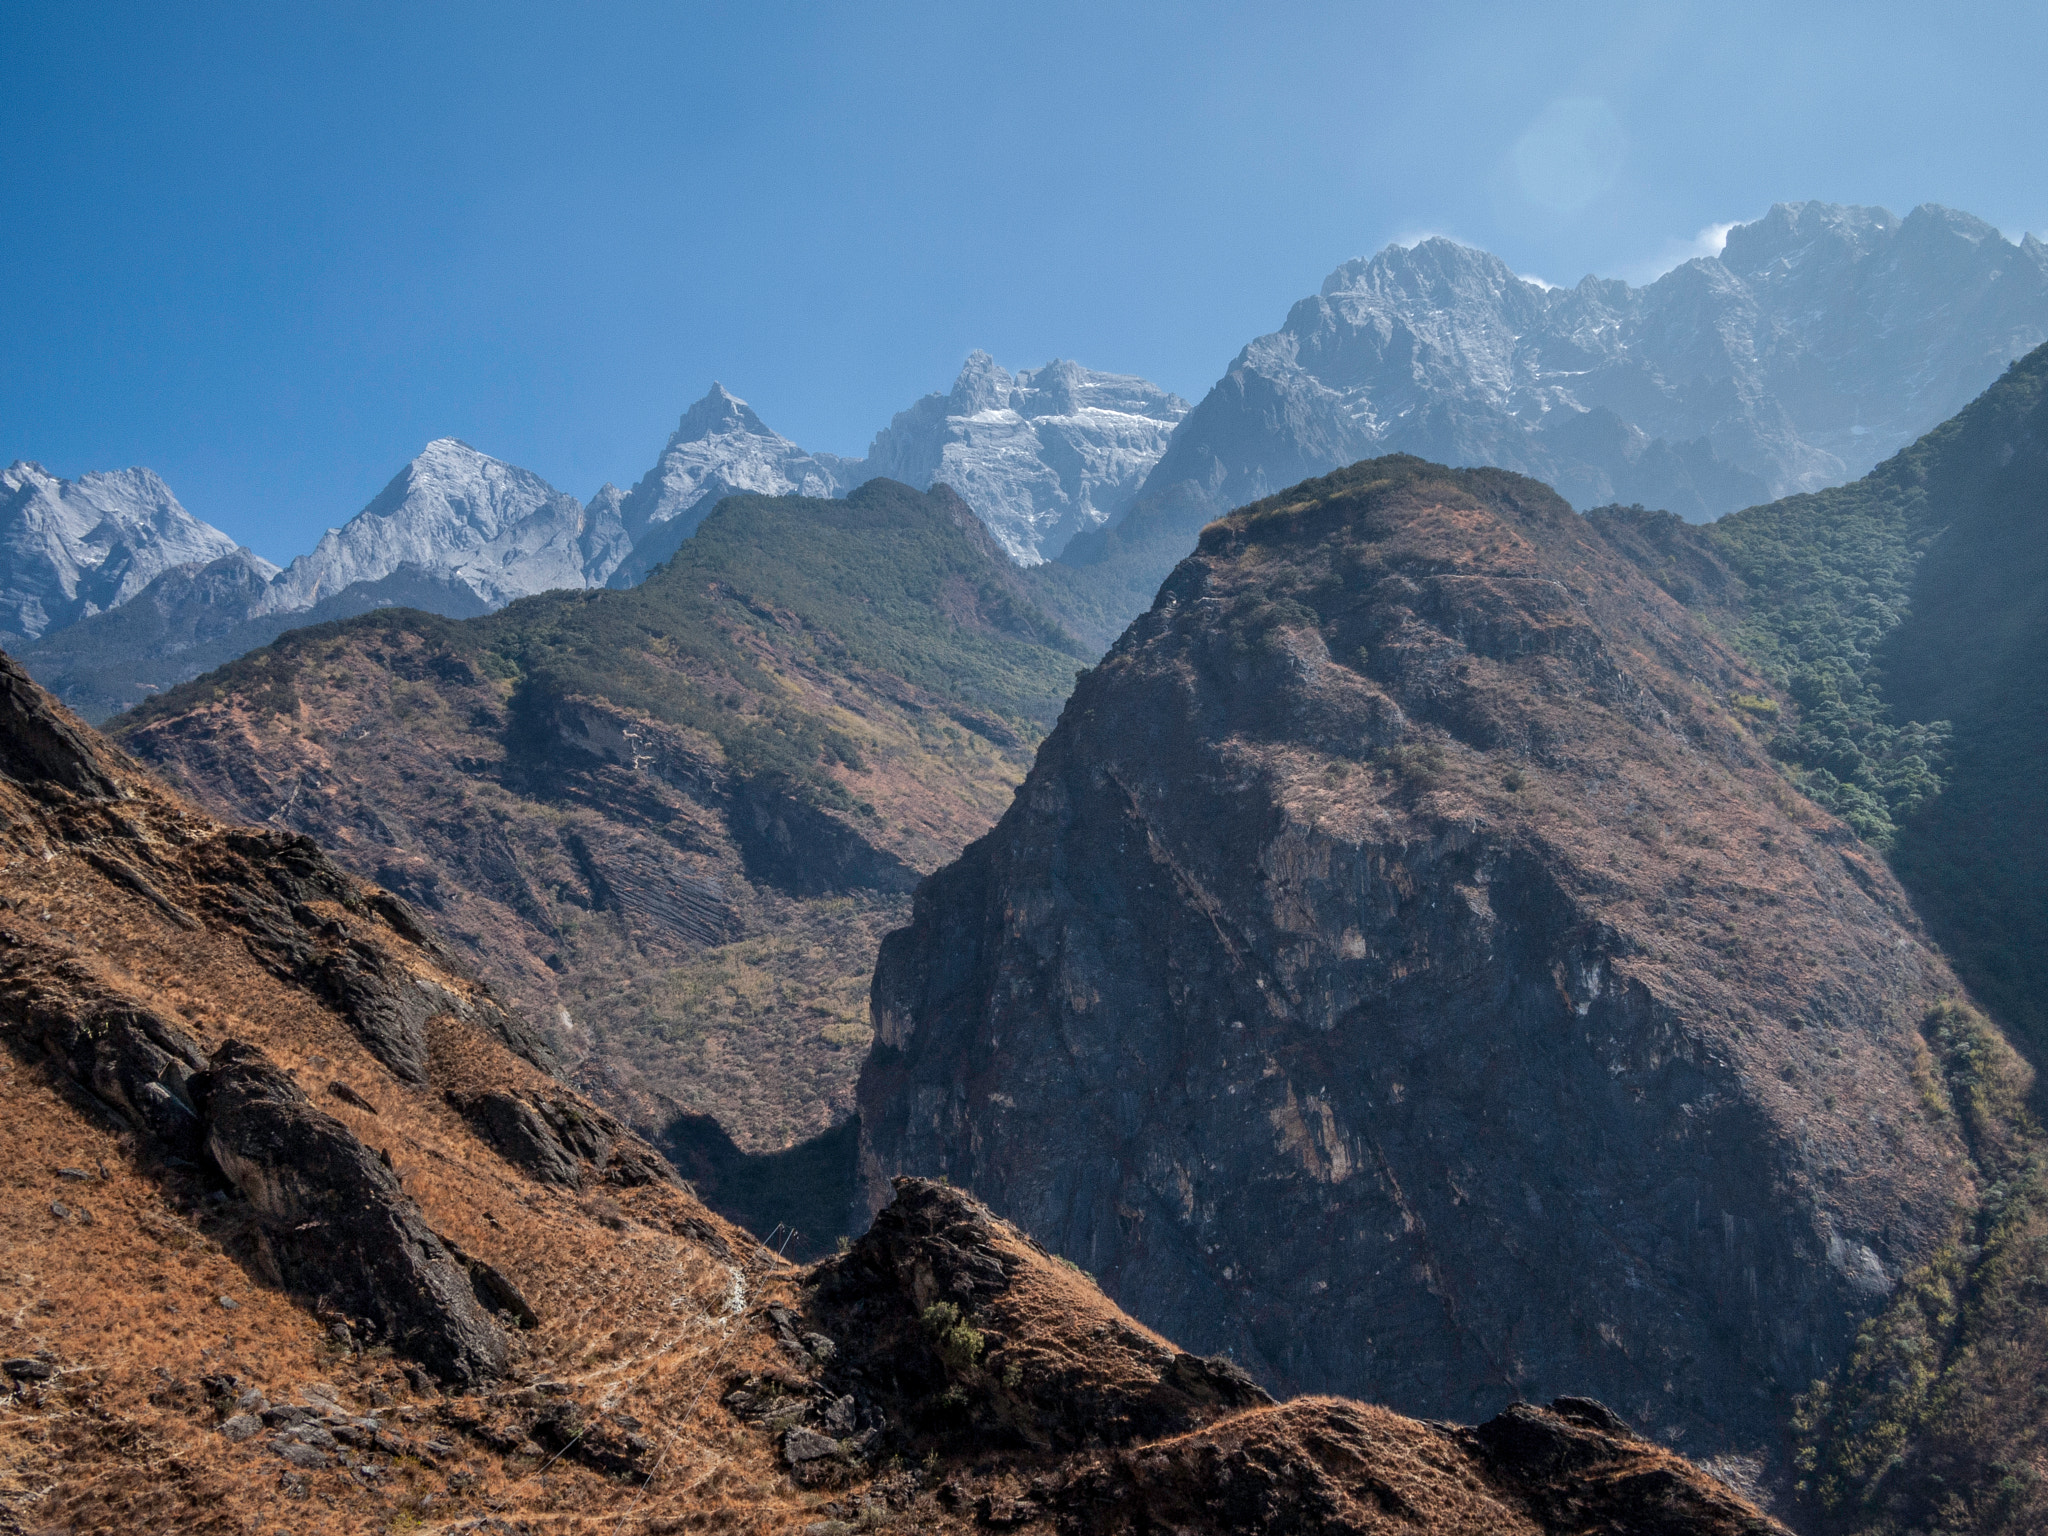 Olympus PEN E-P2 sample photo. Tiger leaping gorge, lijiang, china photography